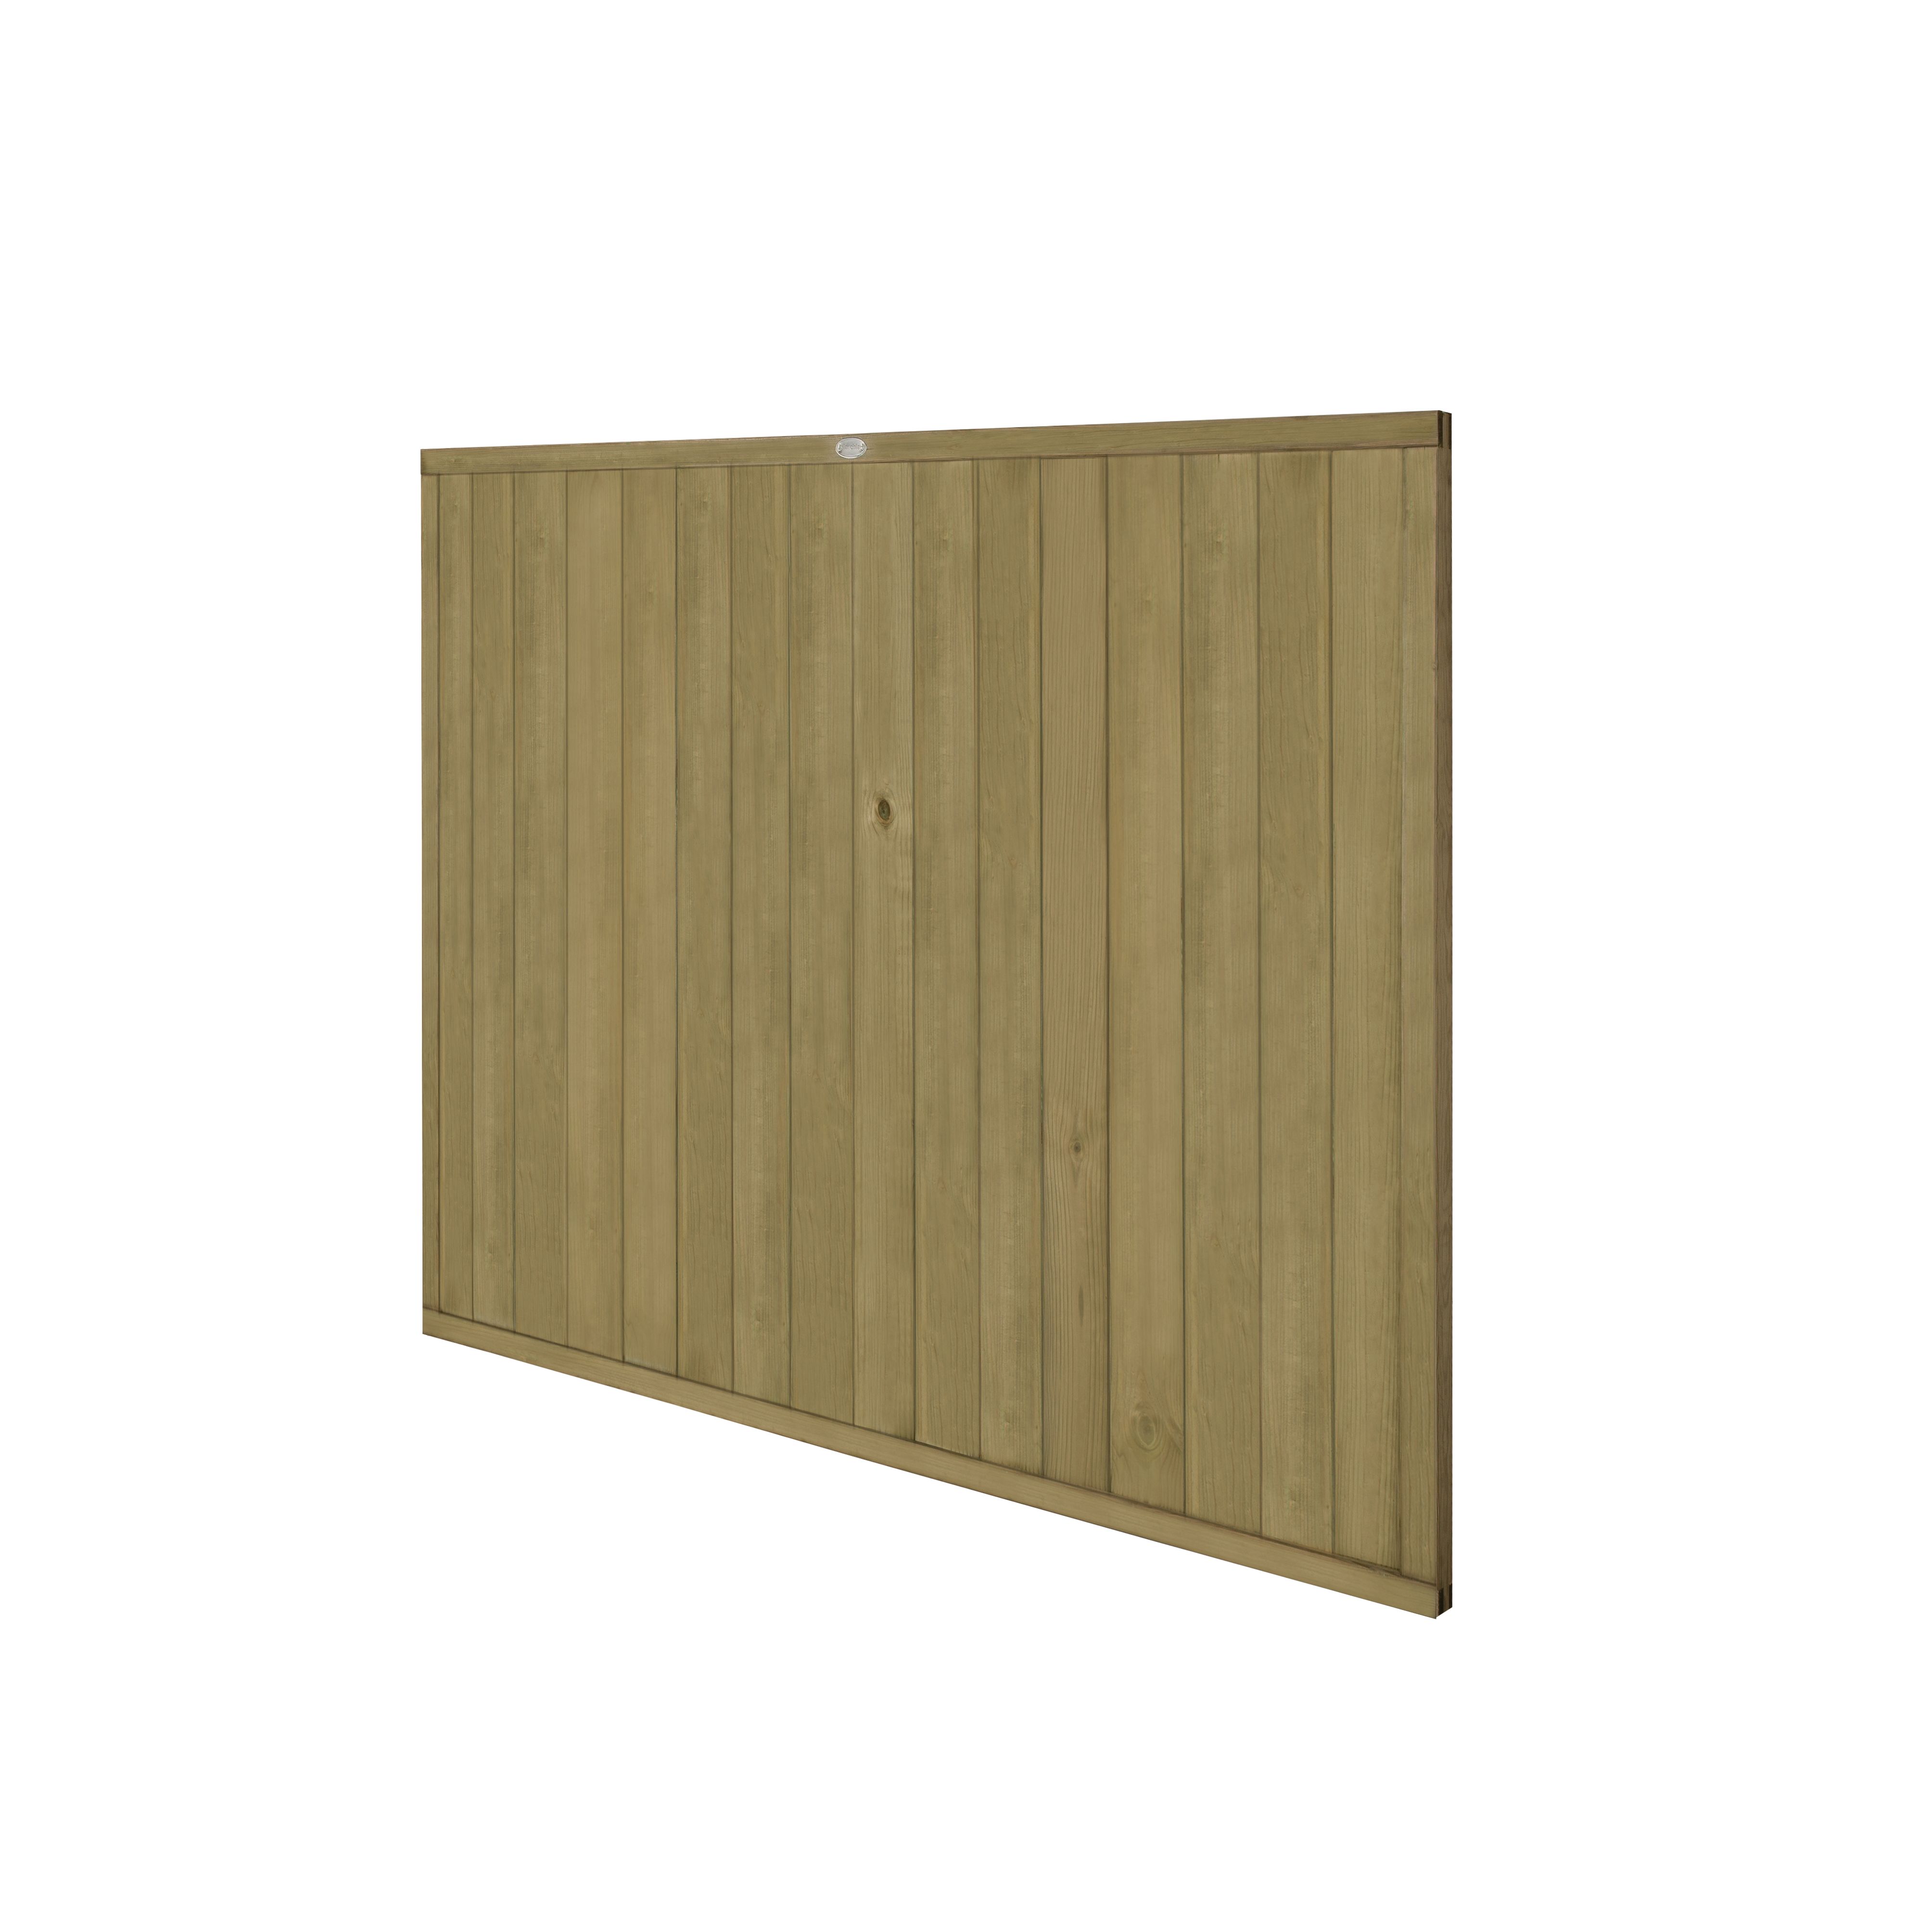 Image of Forest Garden Pressure Treated Tongue & Groove Vertical Fence Panel - 6 x 5ft - Pack of 5